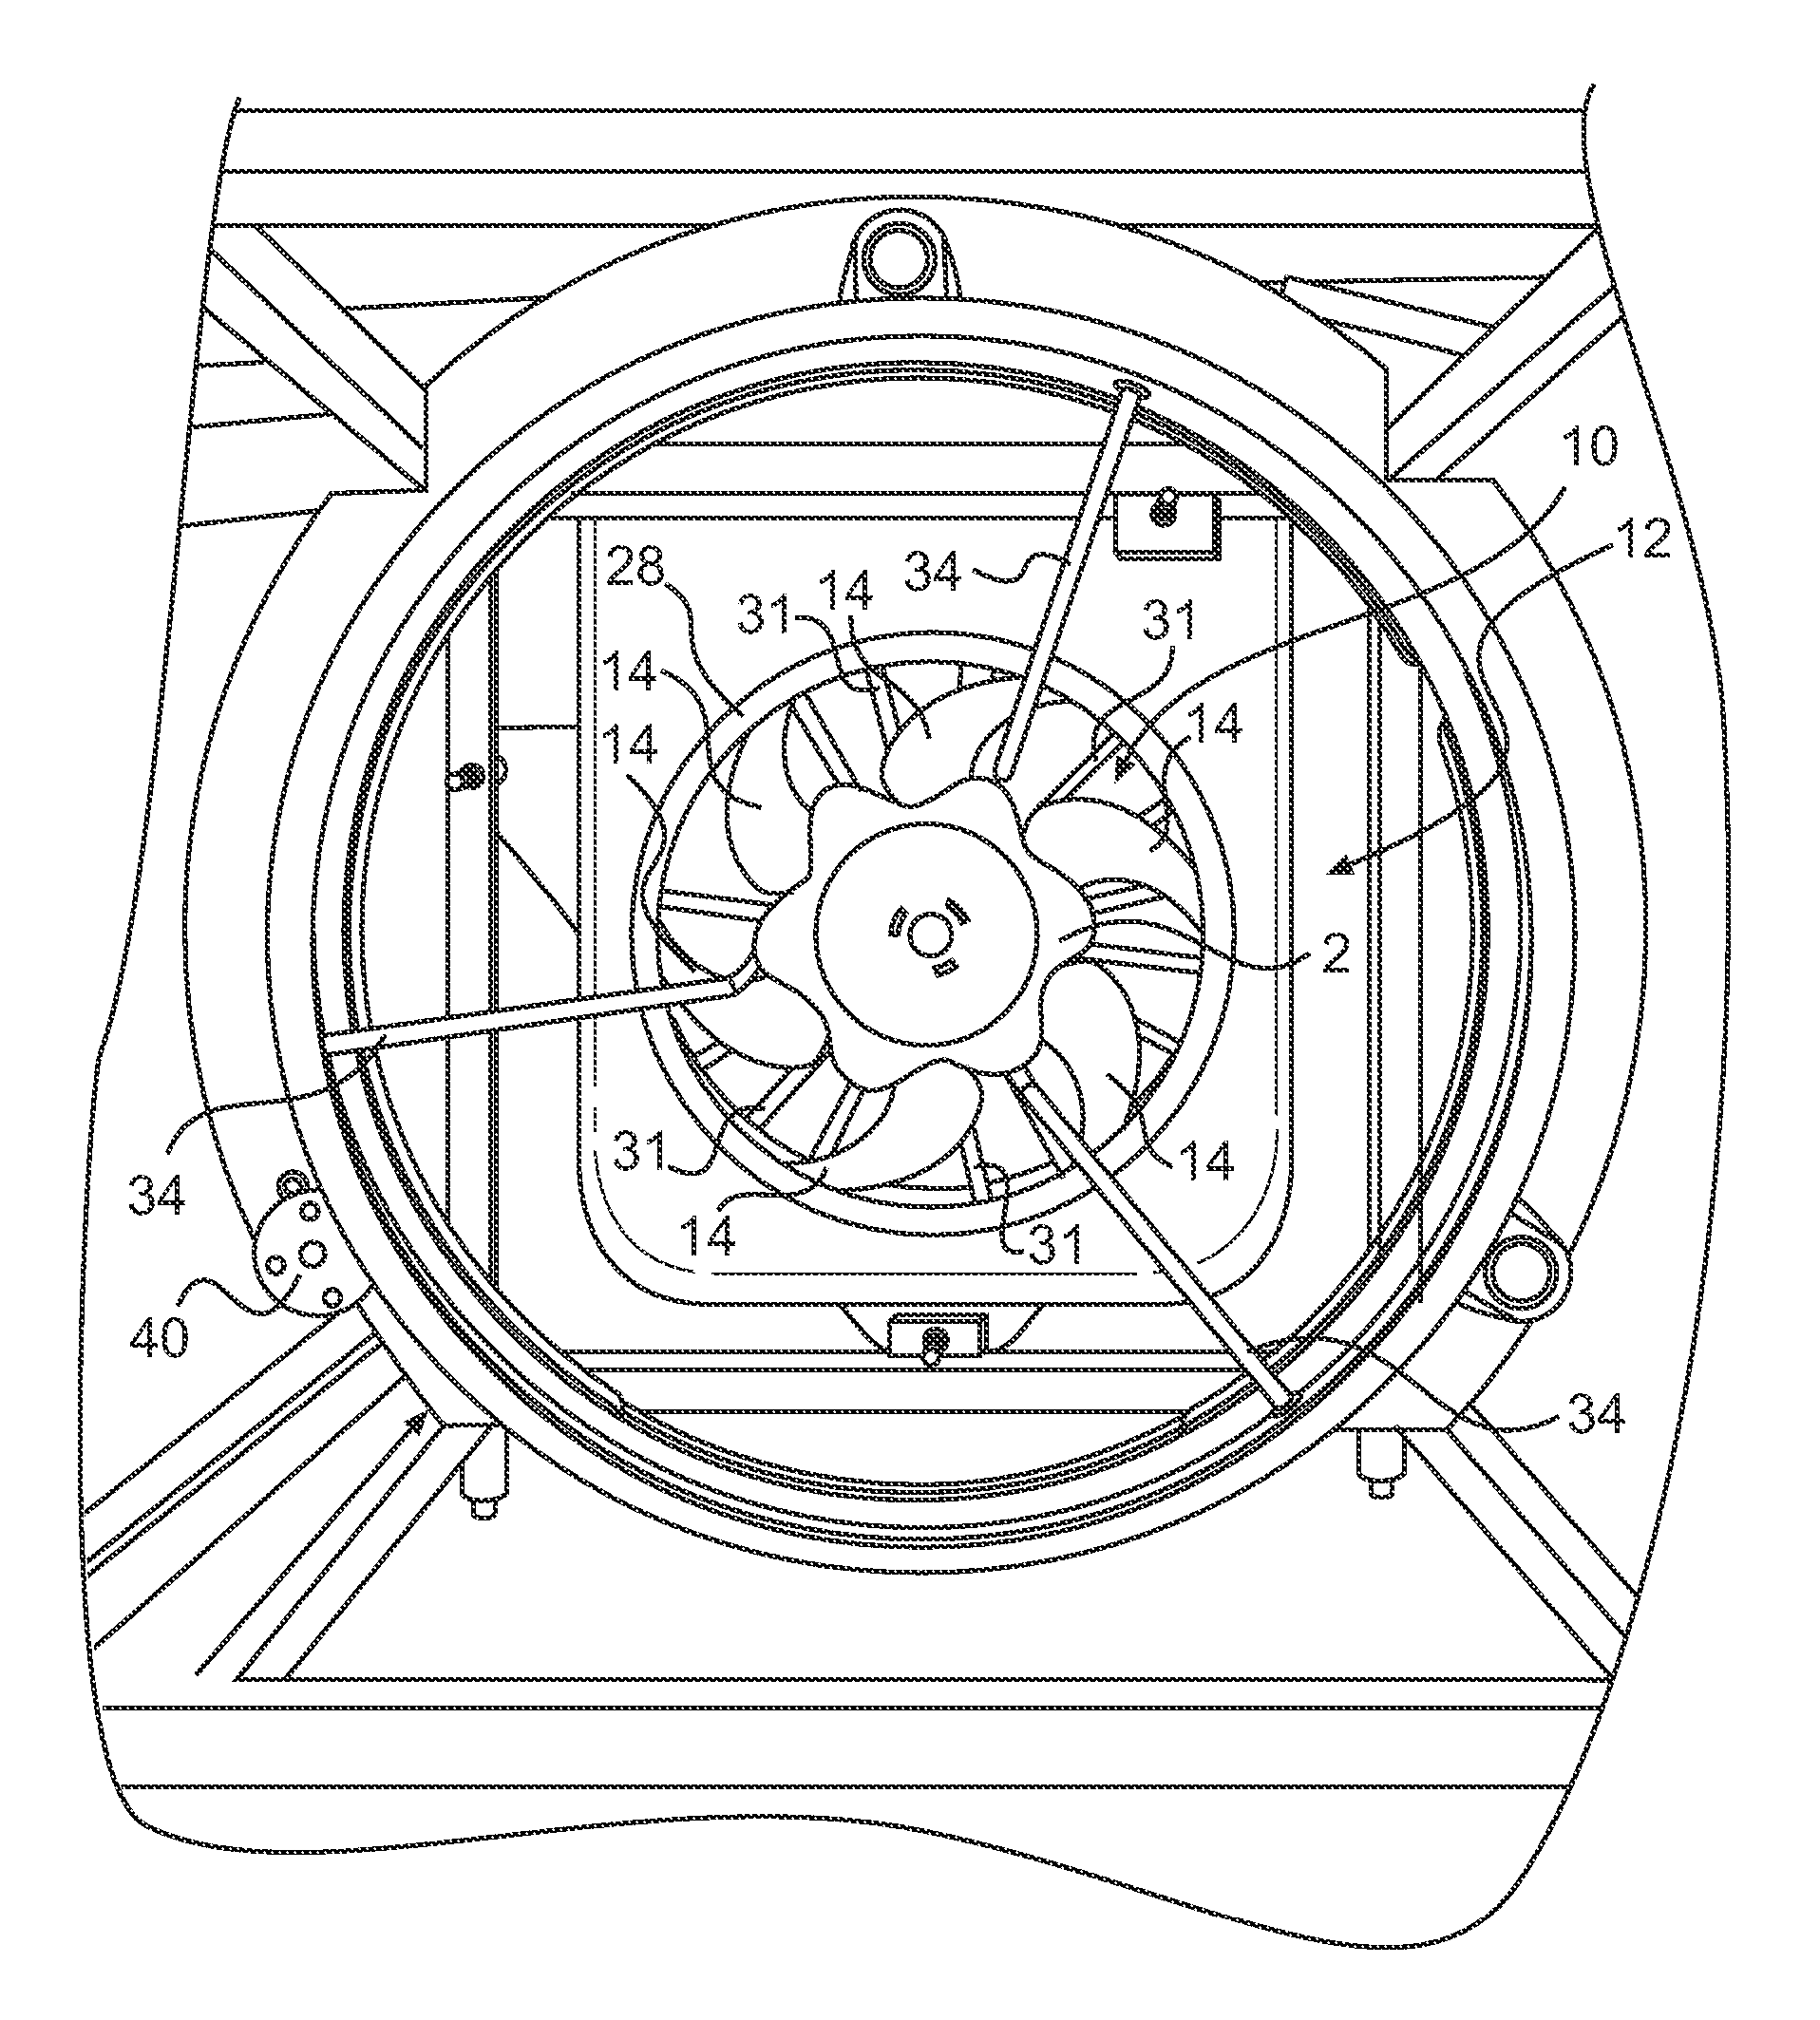 Method and apparatus for controlling tonal noise from subsonic axial fans